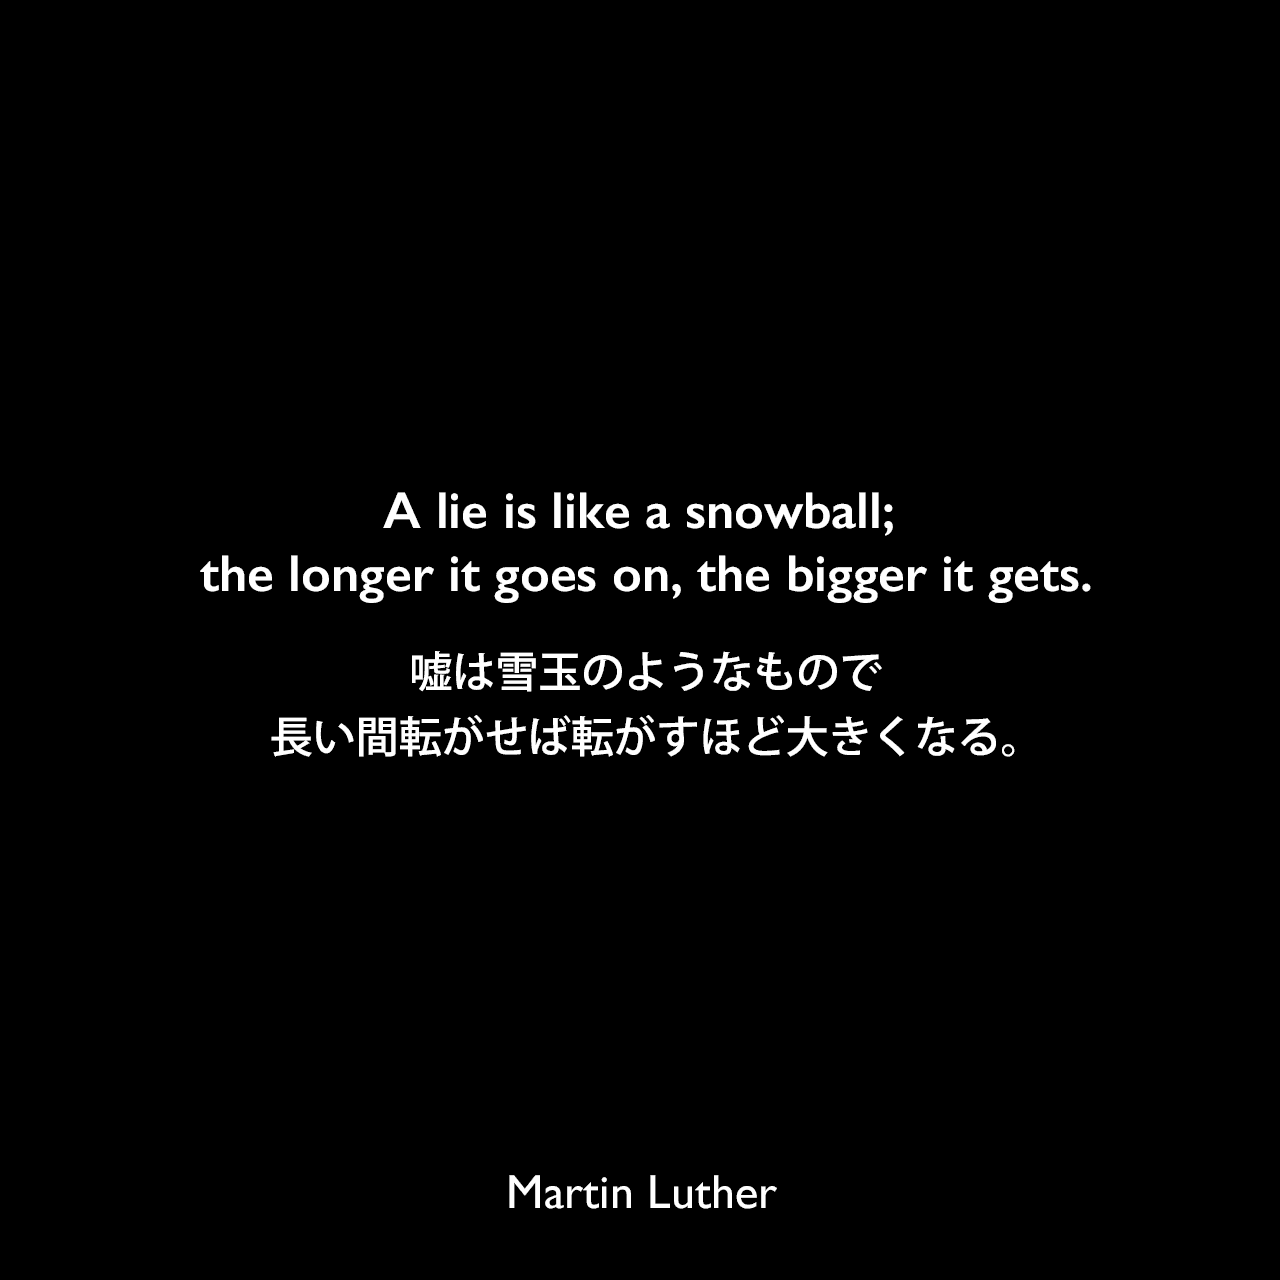 A lie is like a snowball; the longer it goes on, the bigger it gets.嘘は雪玉のようなもので、長い間転がせば転がすほど大きくなる。Martin Luther